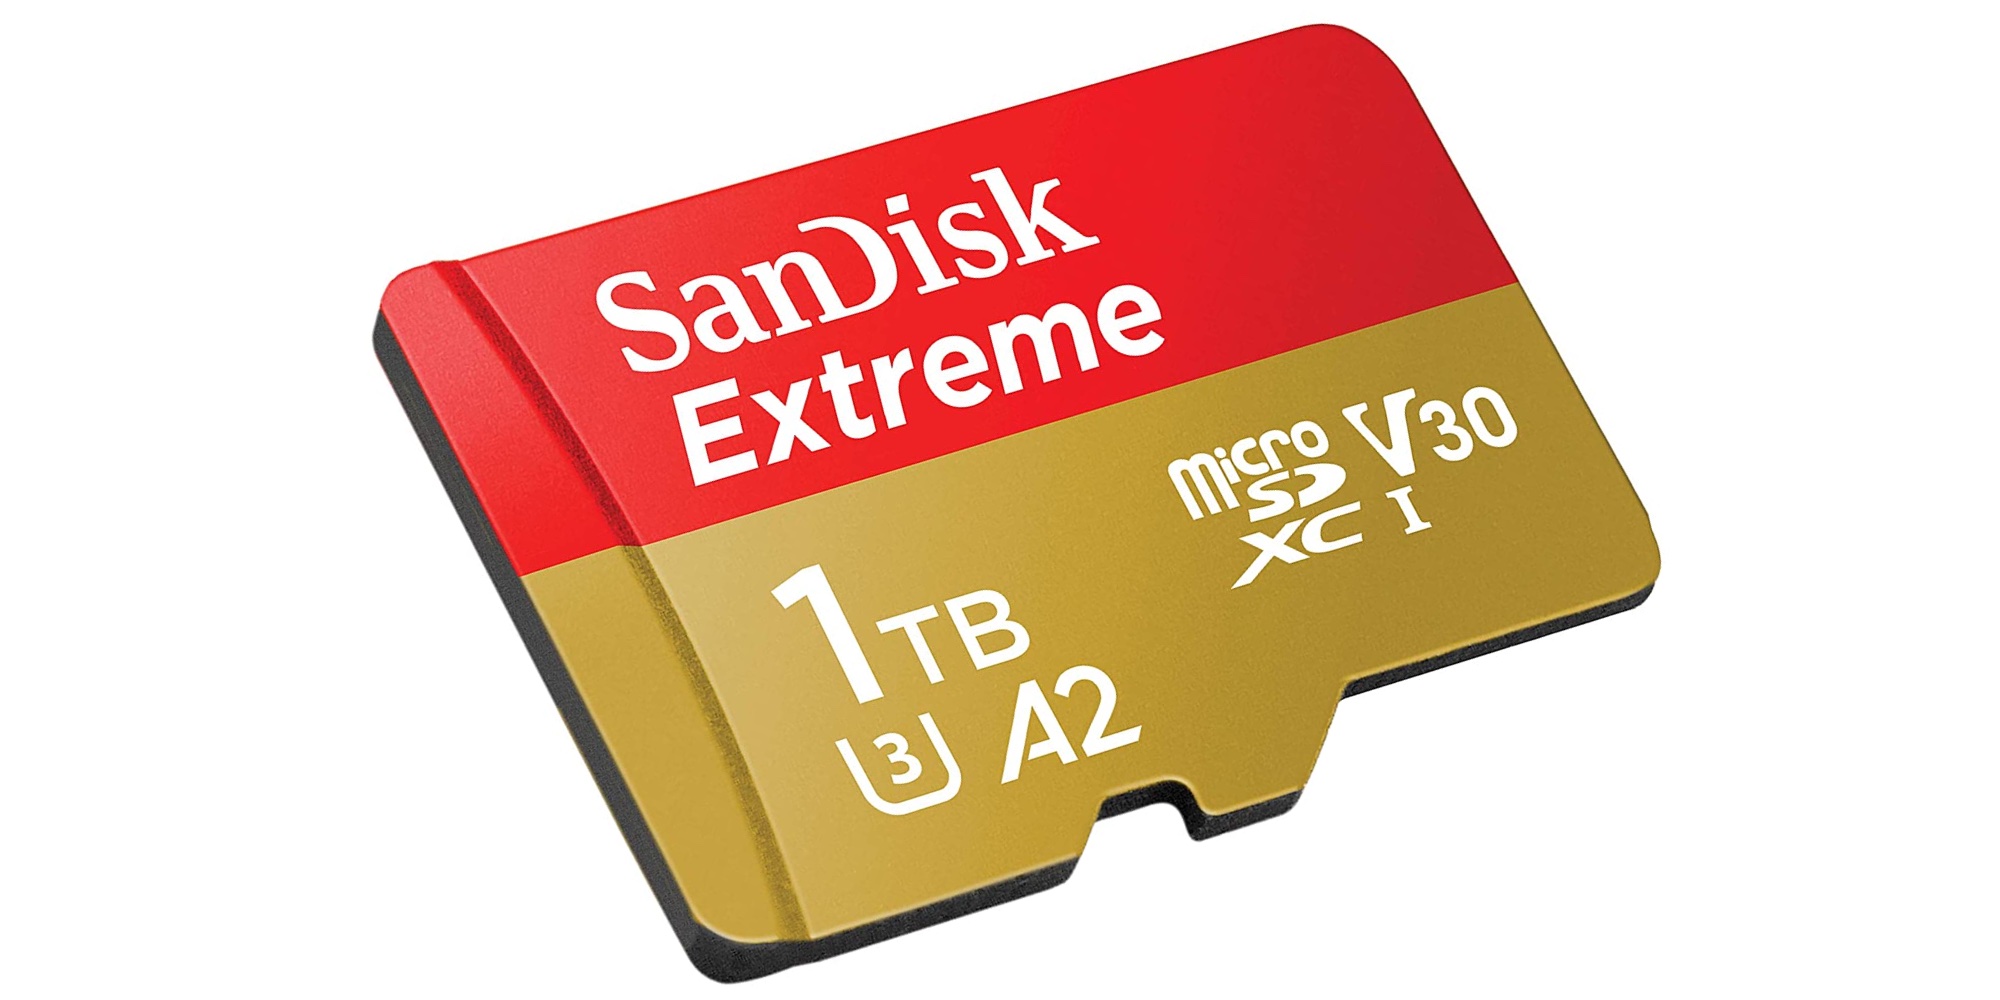 Grab 1TB of SanDisk Extreme microSD card storage at an Amazon low